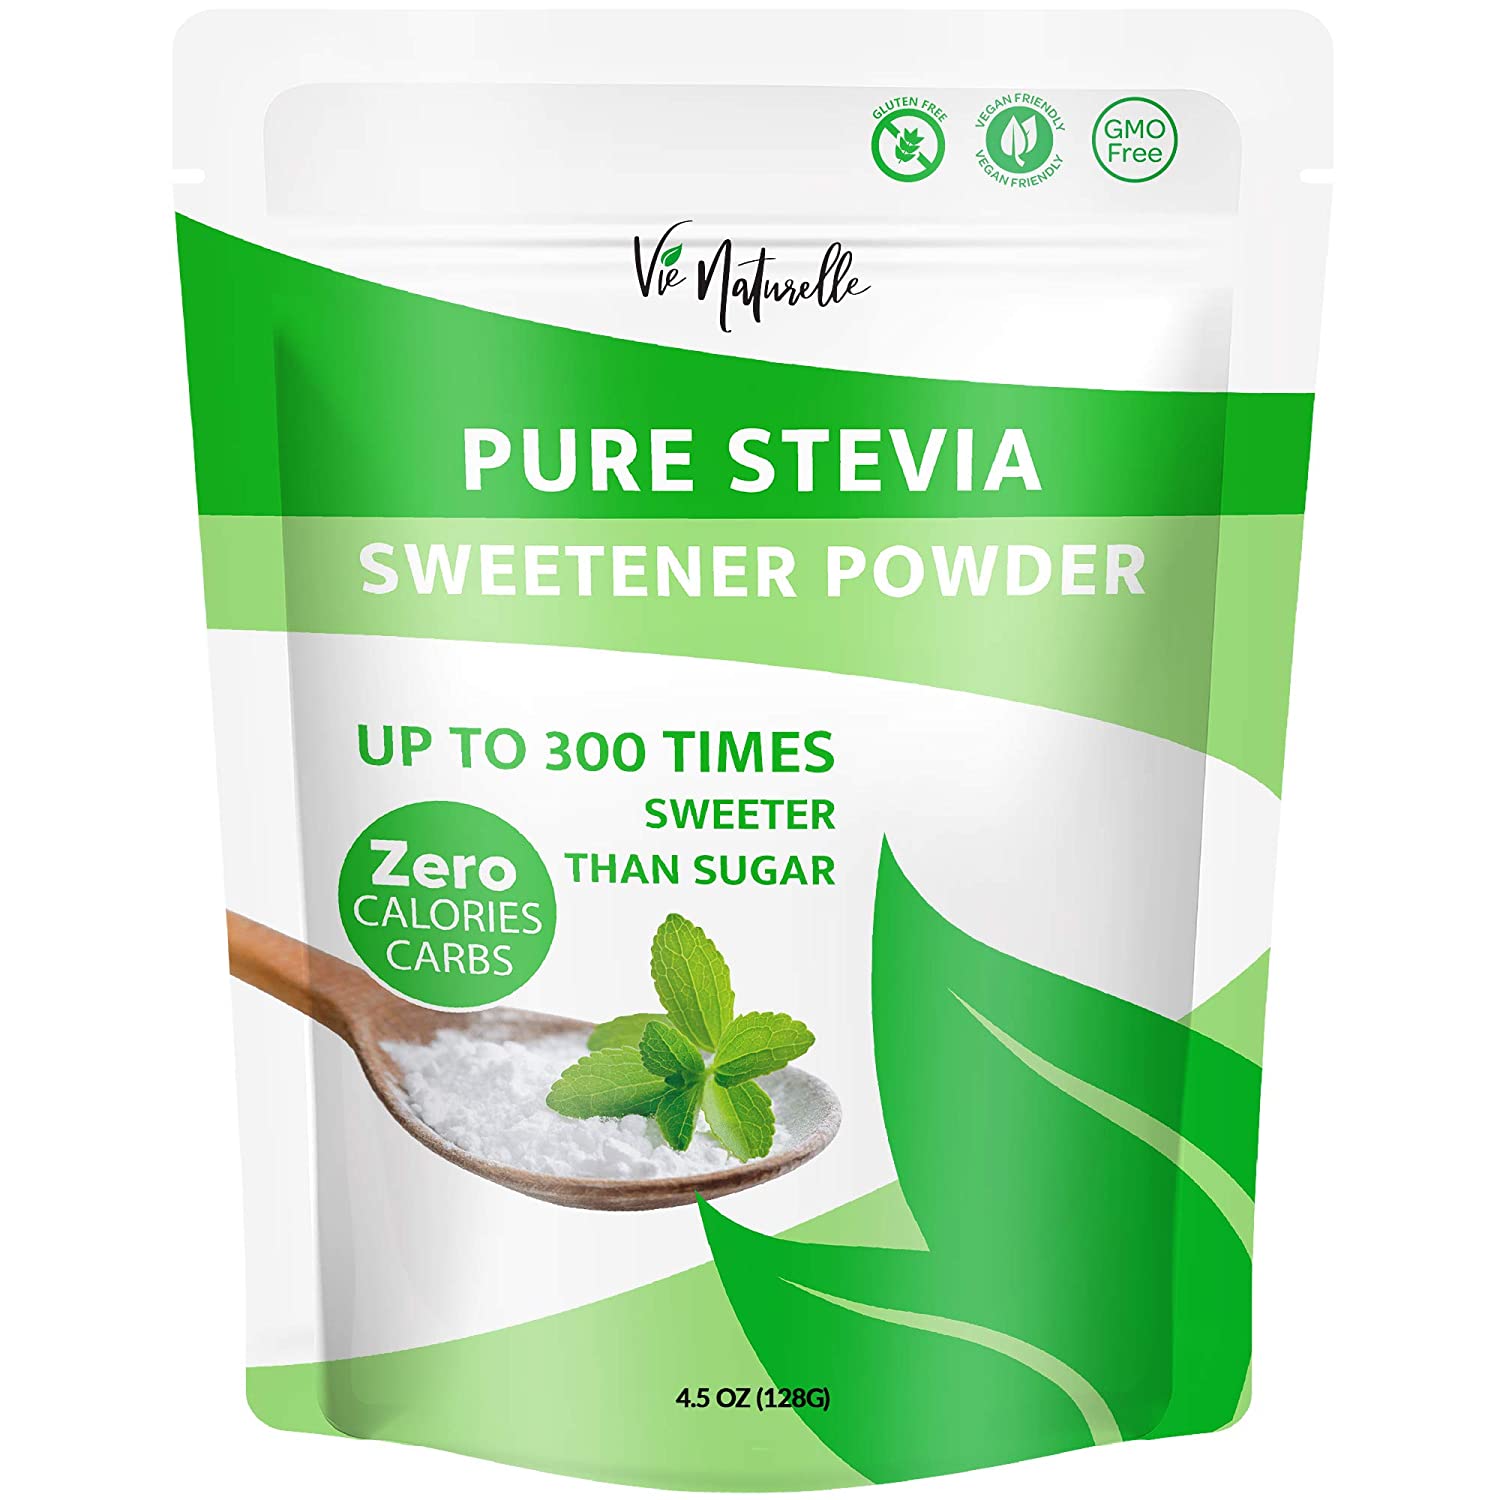 Ranking the best stevia of 2021 - Body Nutrition